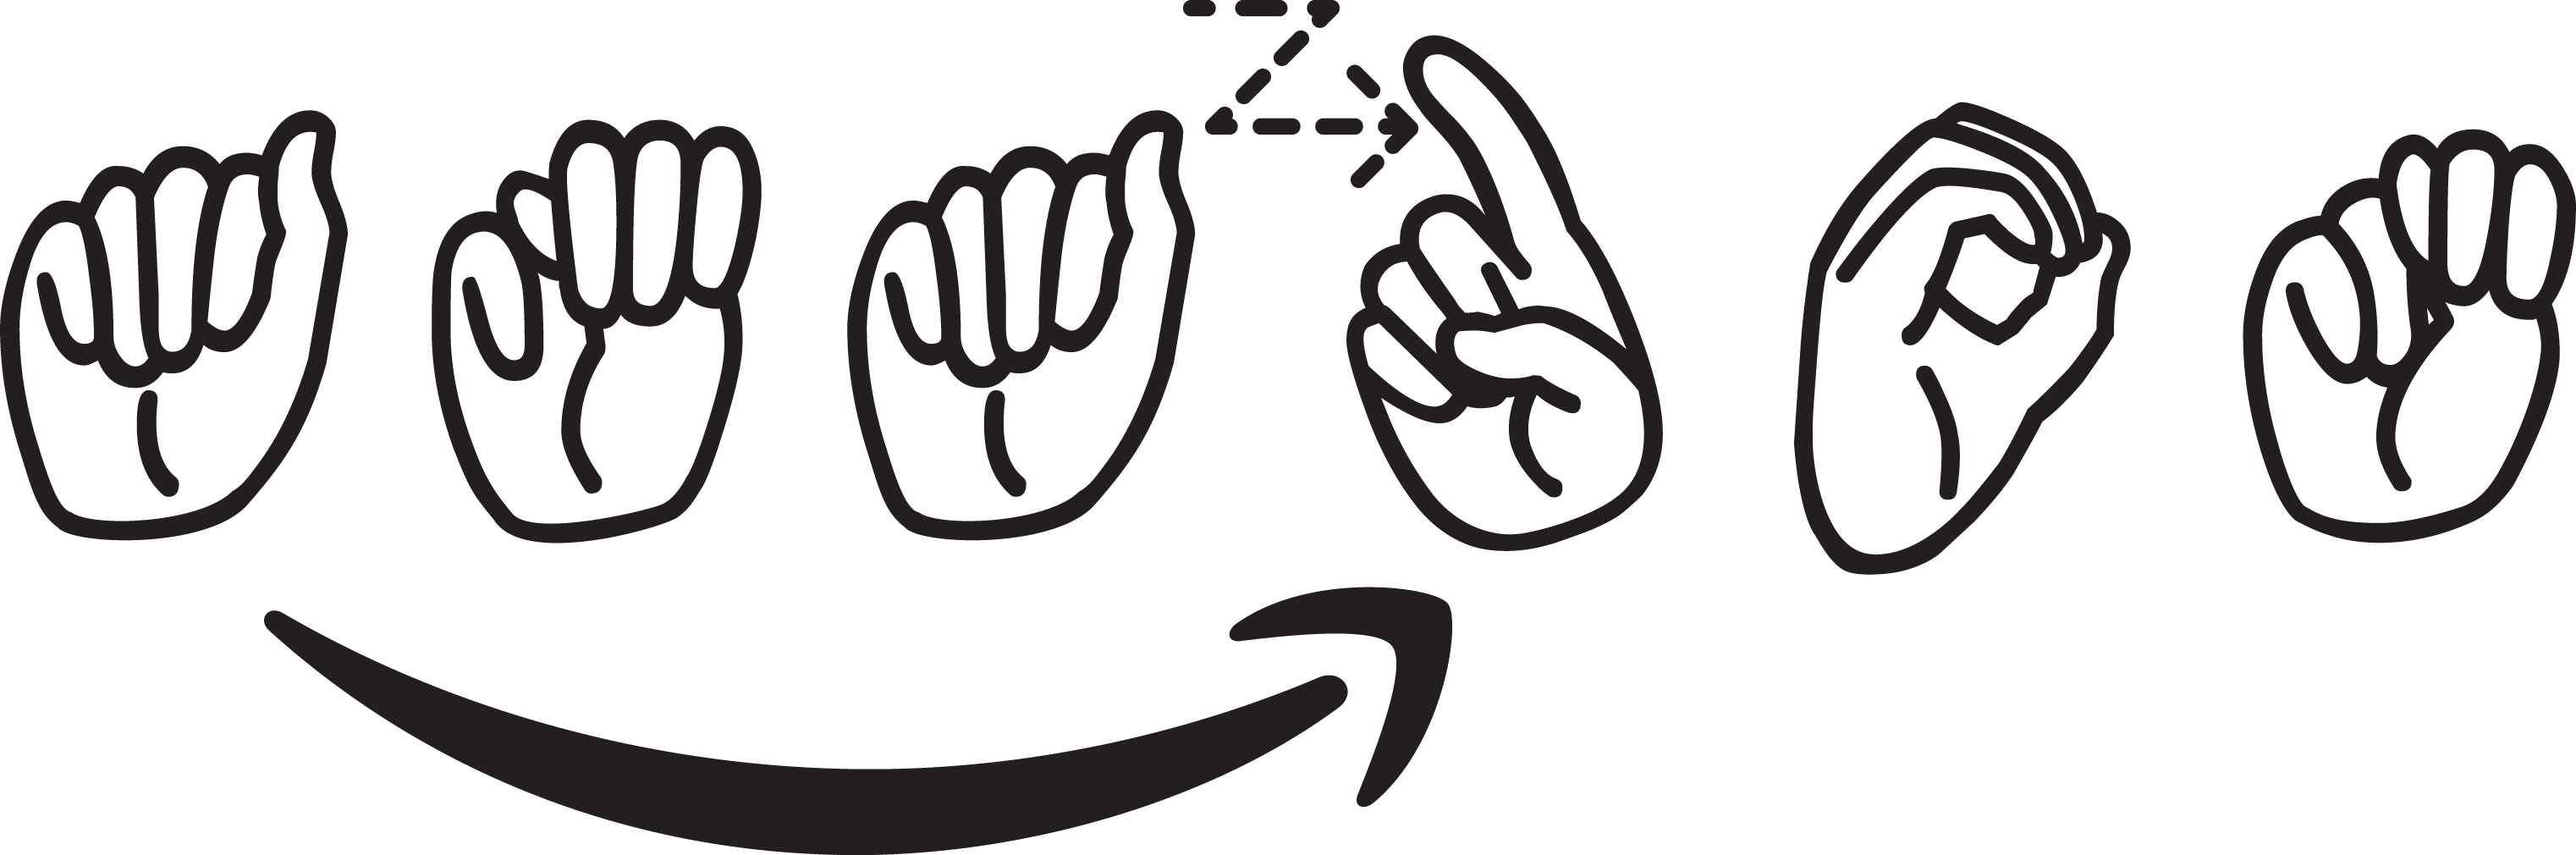 Amazon logo. The name Amazon is spelled in ASL inside the white rectangle.